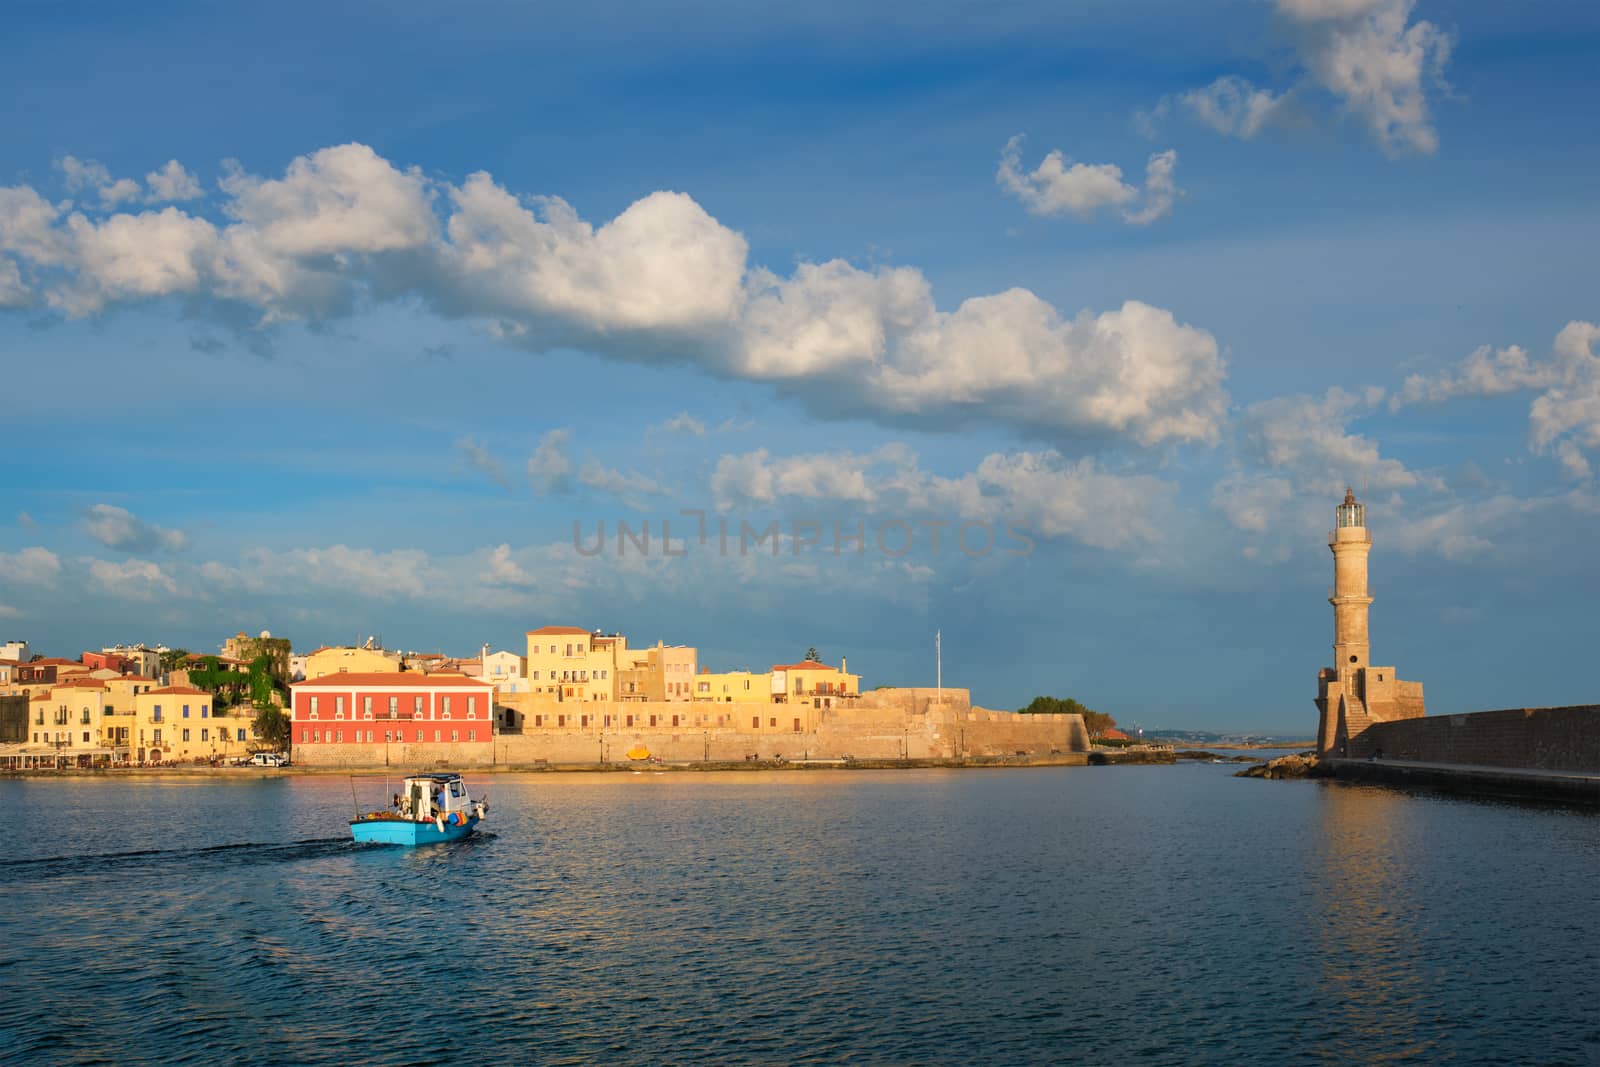 Boat in picturesque old port of Chania, Crete island. Greece by dimol